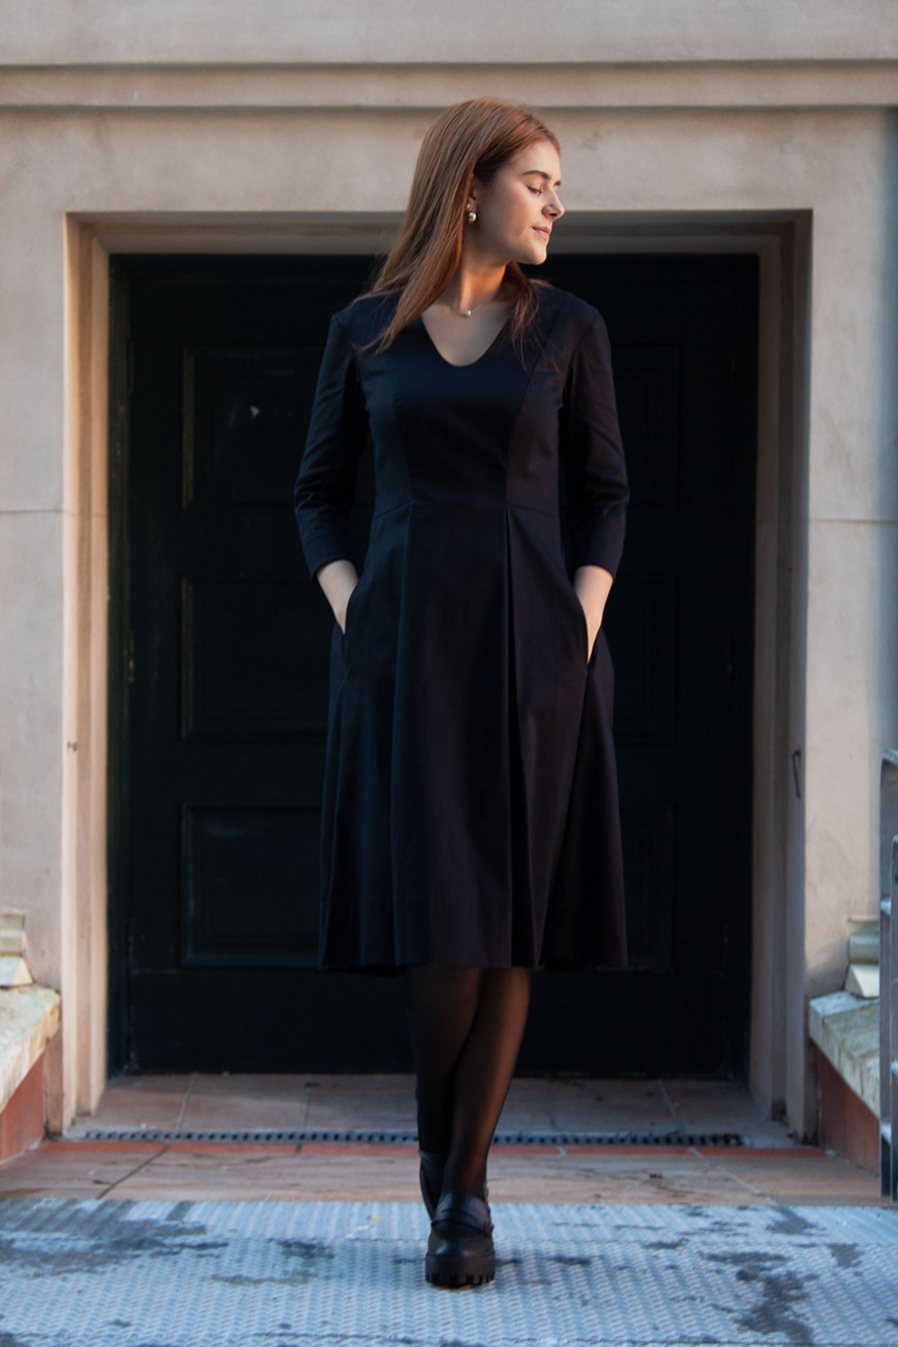 Tights with Dresses (Part 2) – Teach in Style